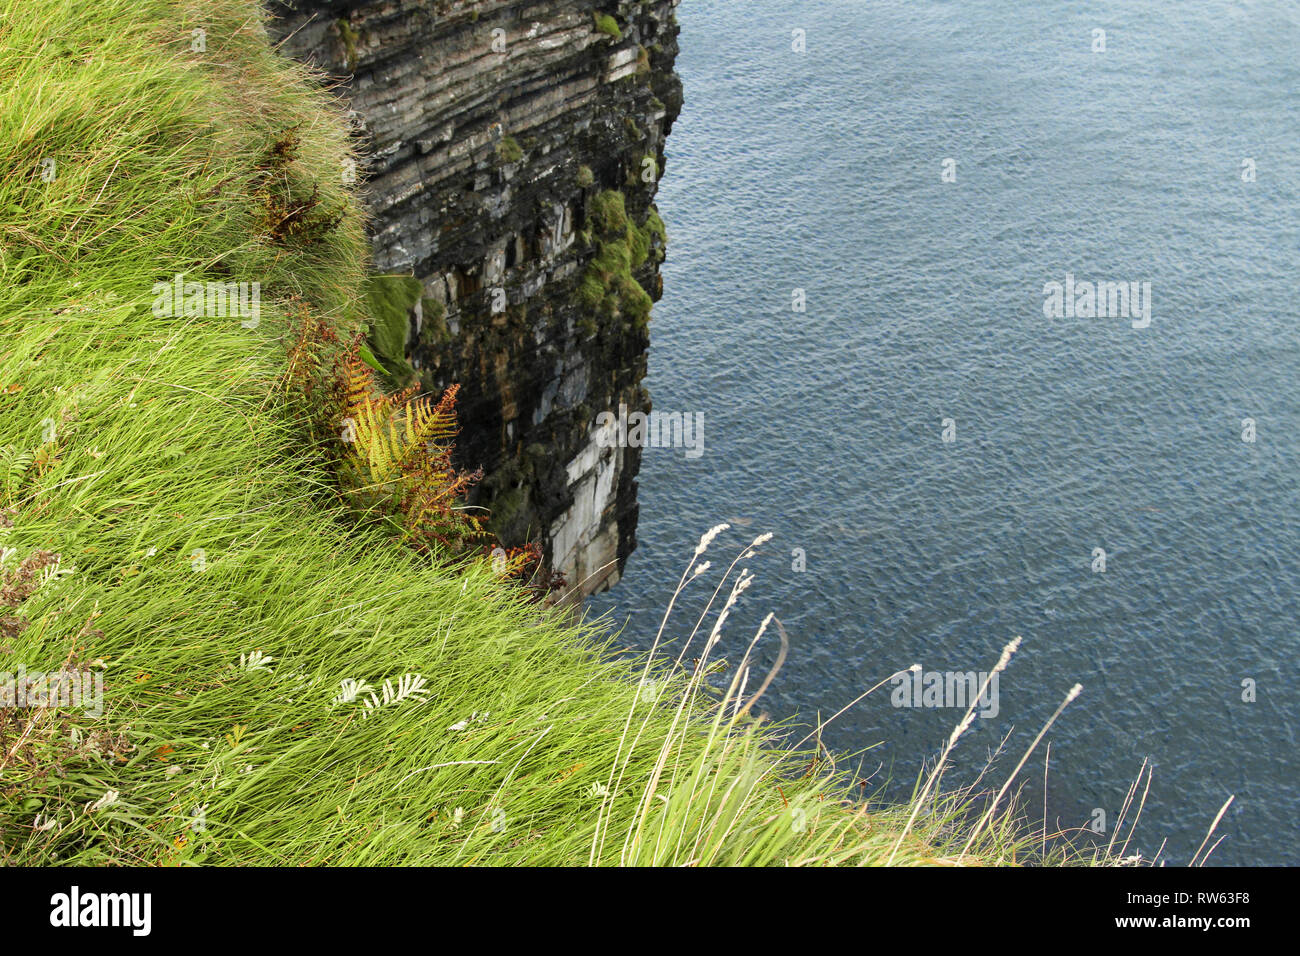 View looking over a steep cliffs edge to the ocean below. Long green grass verge at the top of a high cliff. Stock Photo